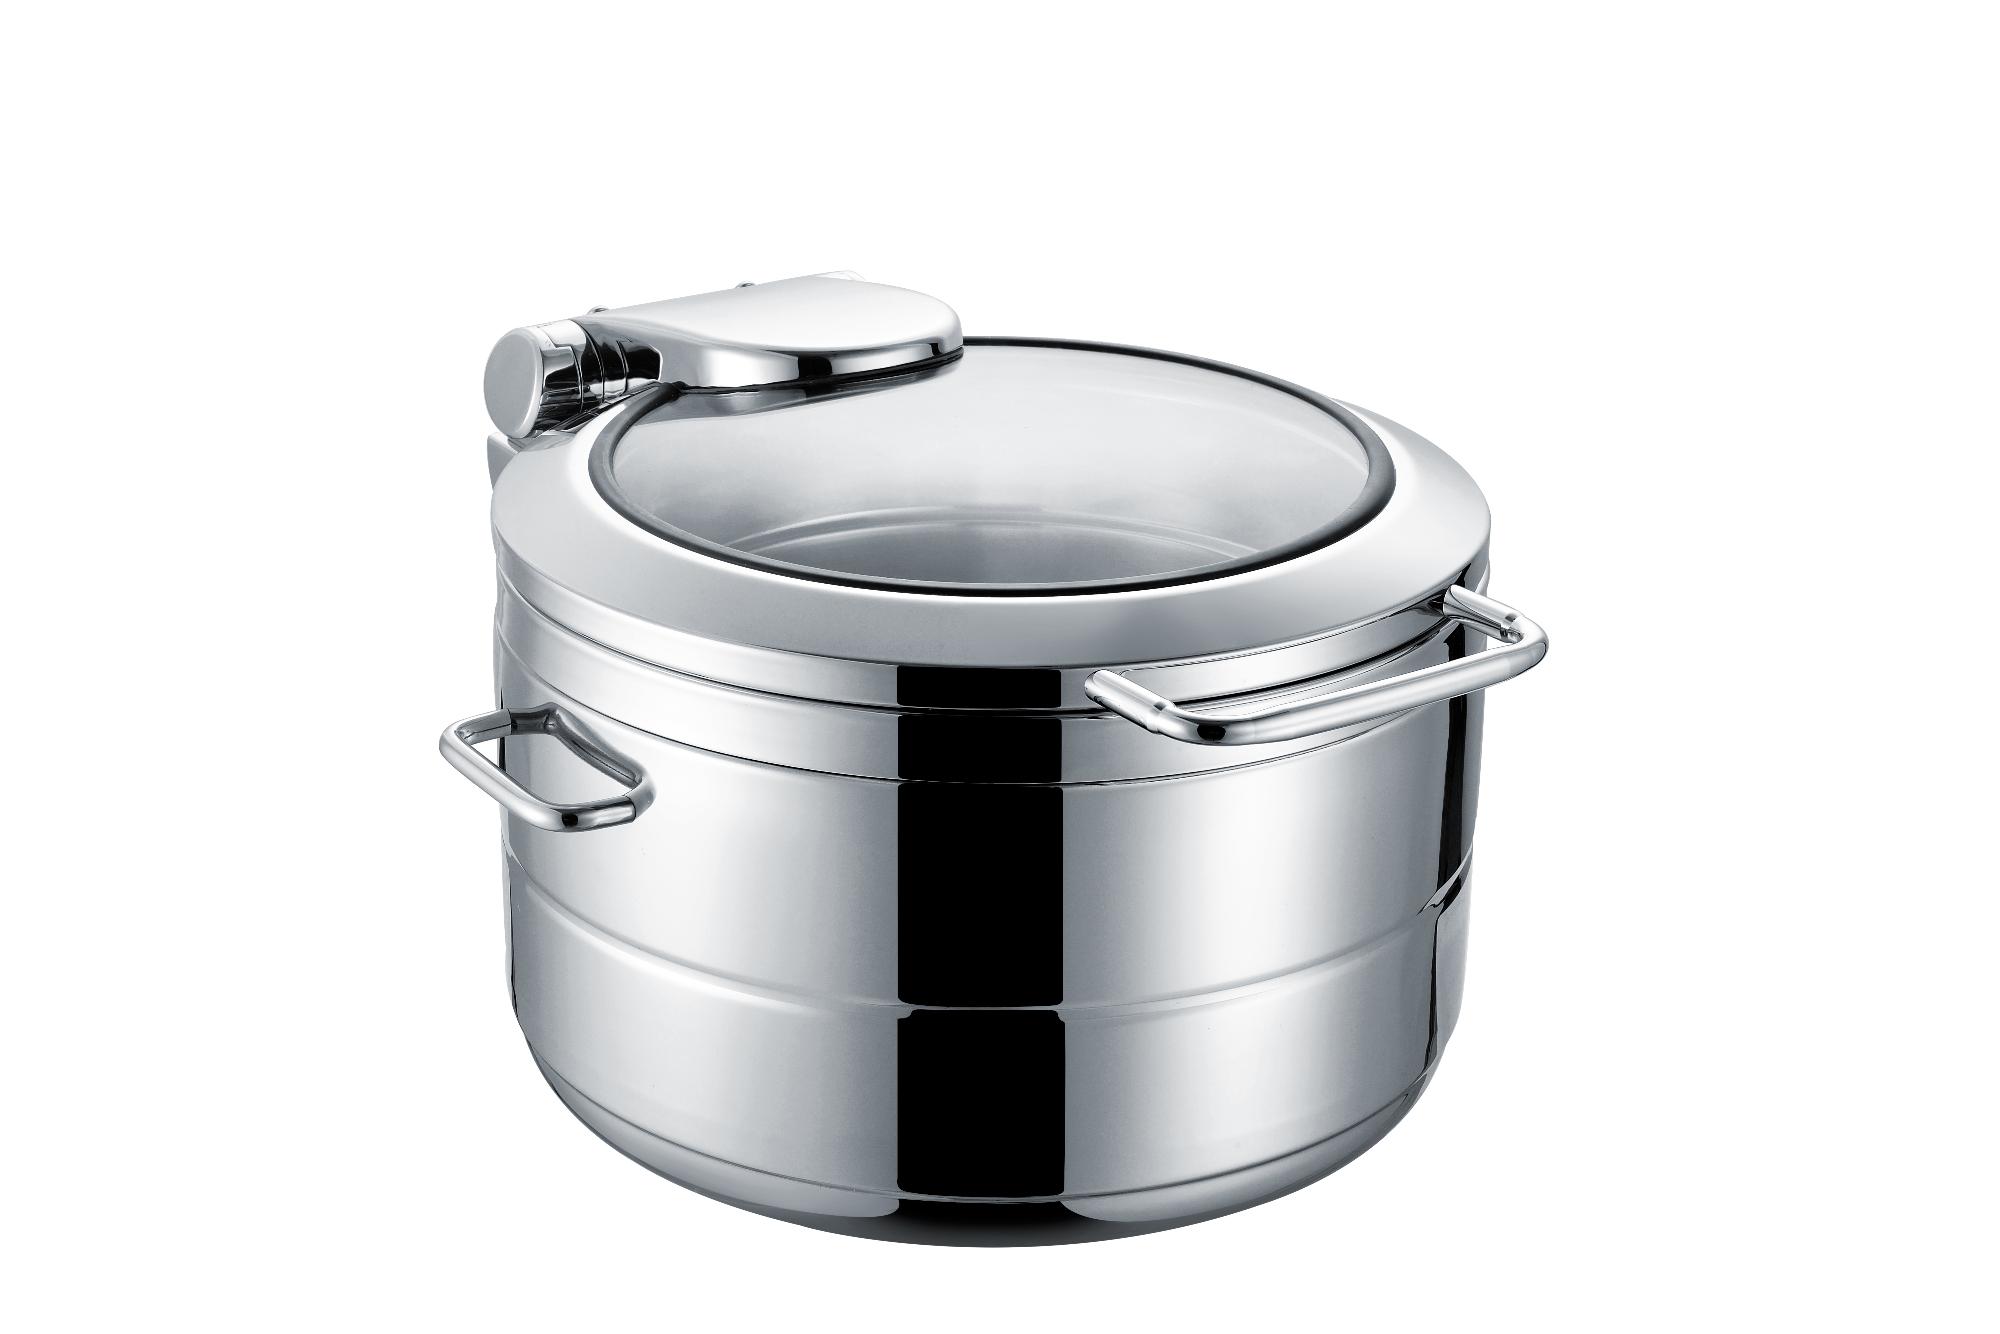 De Luxe Eco deep induction chafing dish with glass lid, 11l